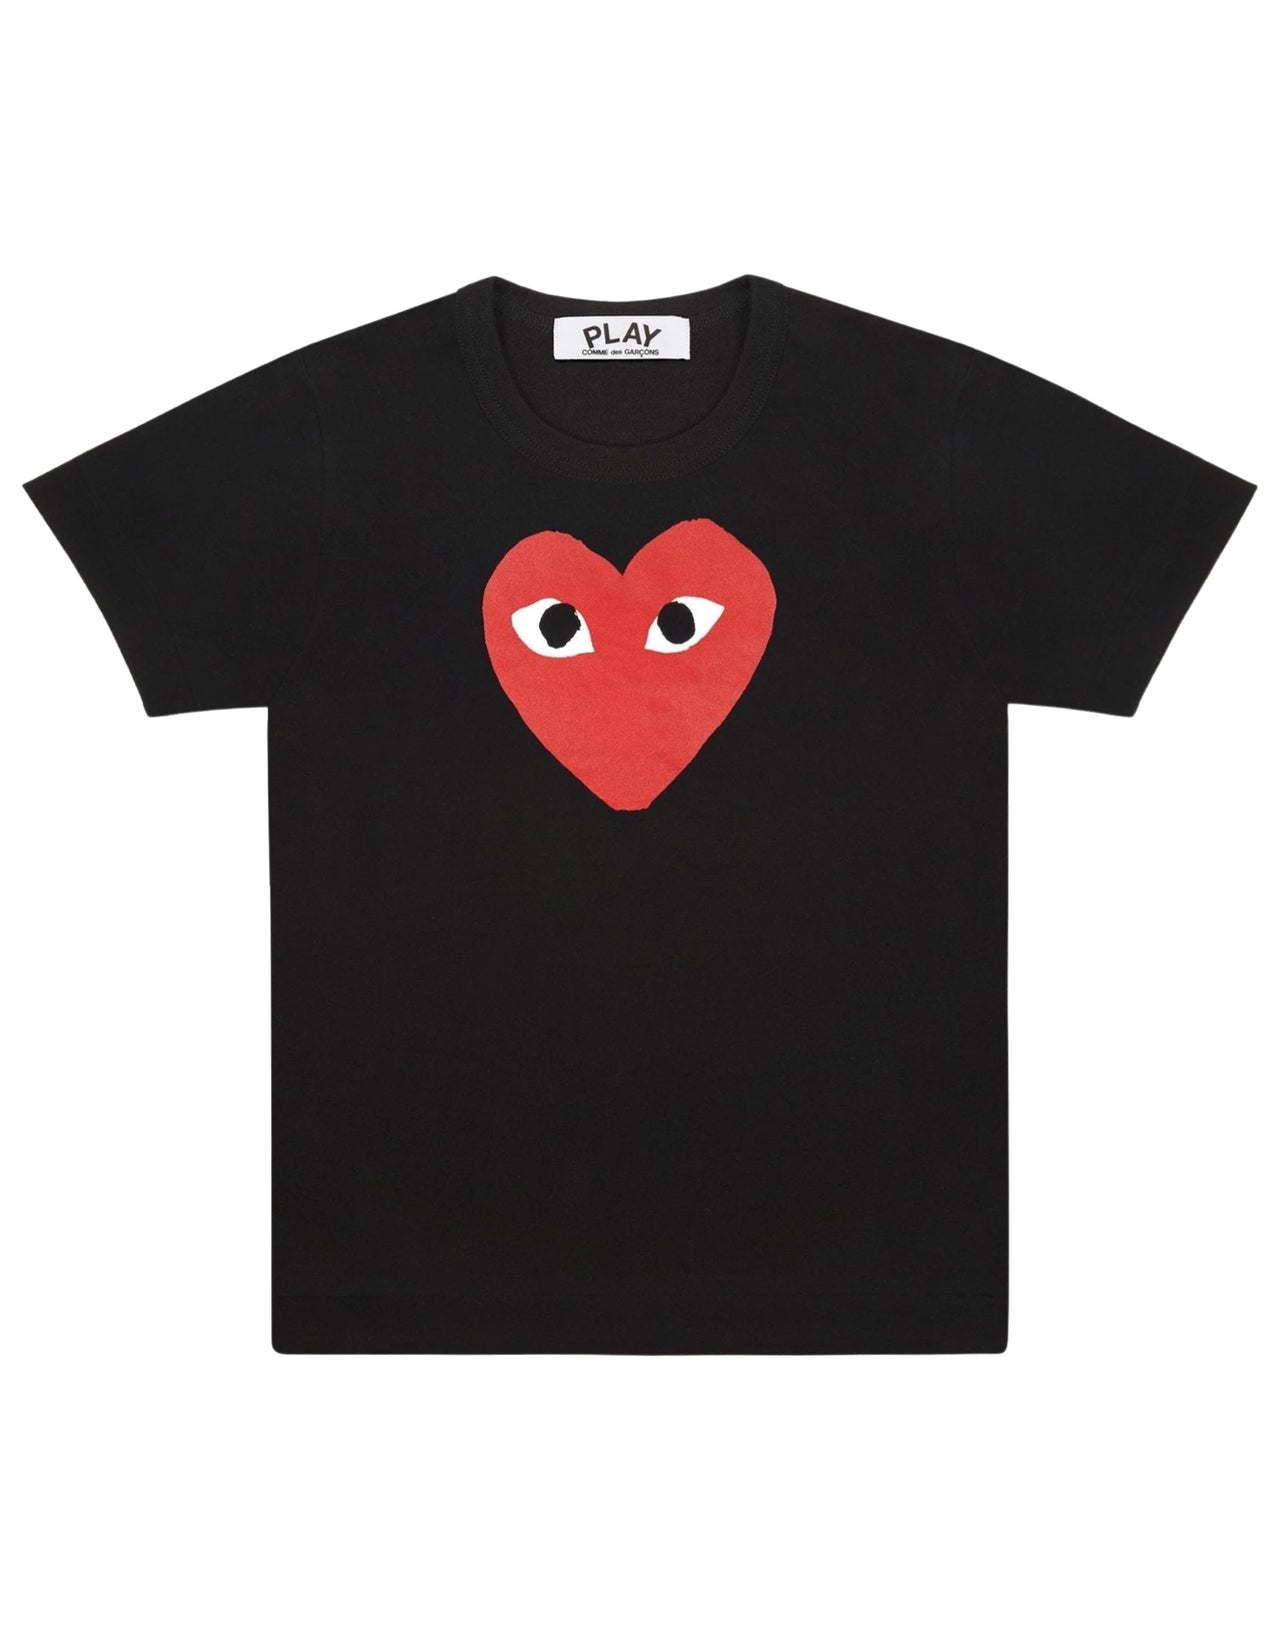 CDG Play T-shirt with black red heart